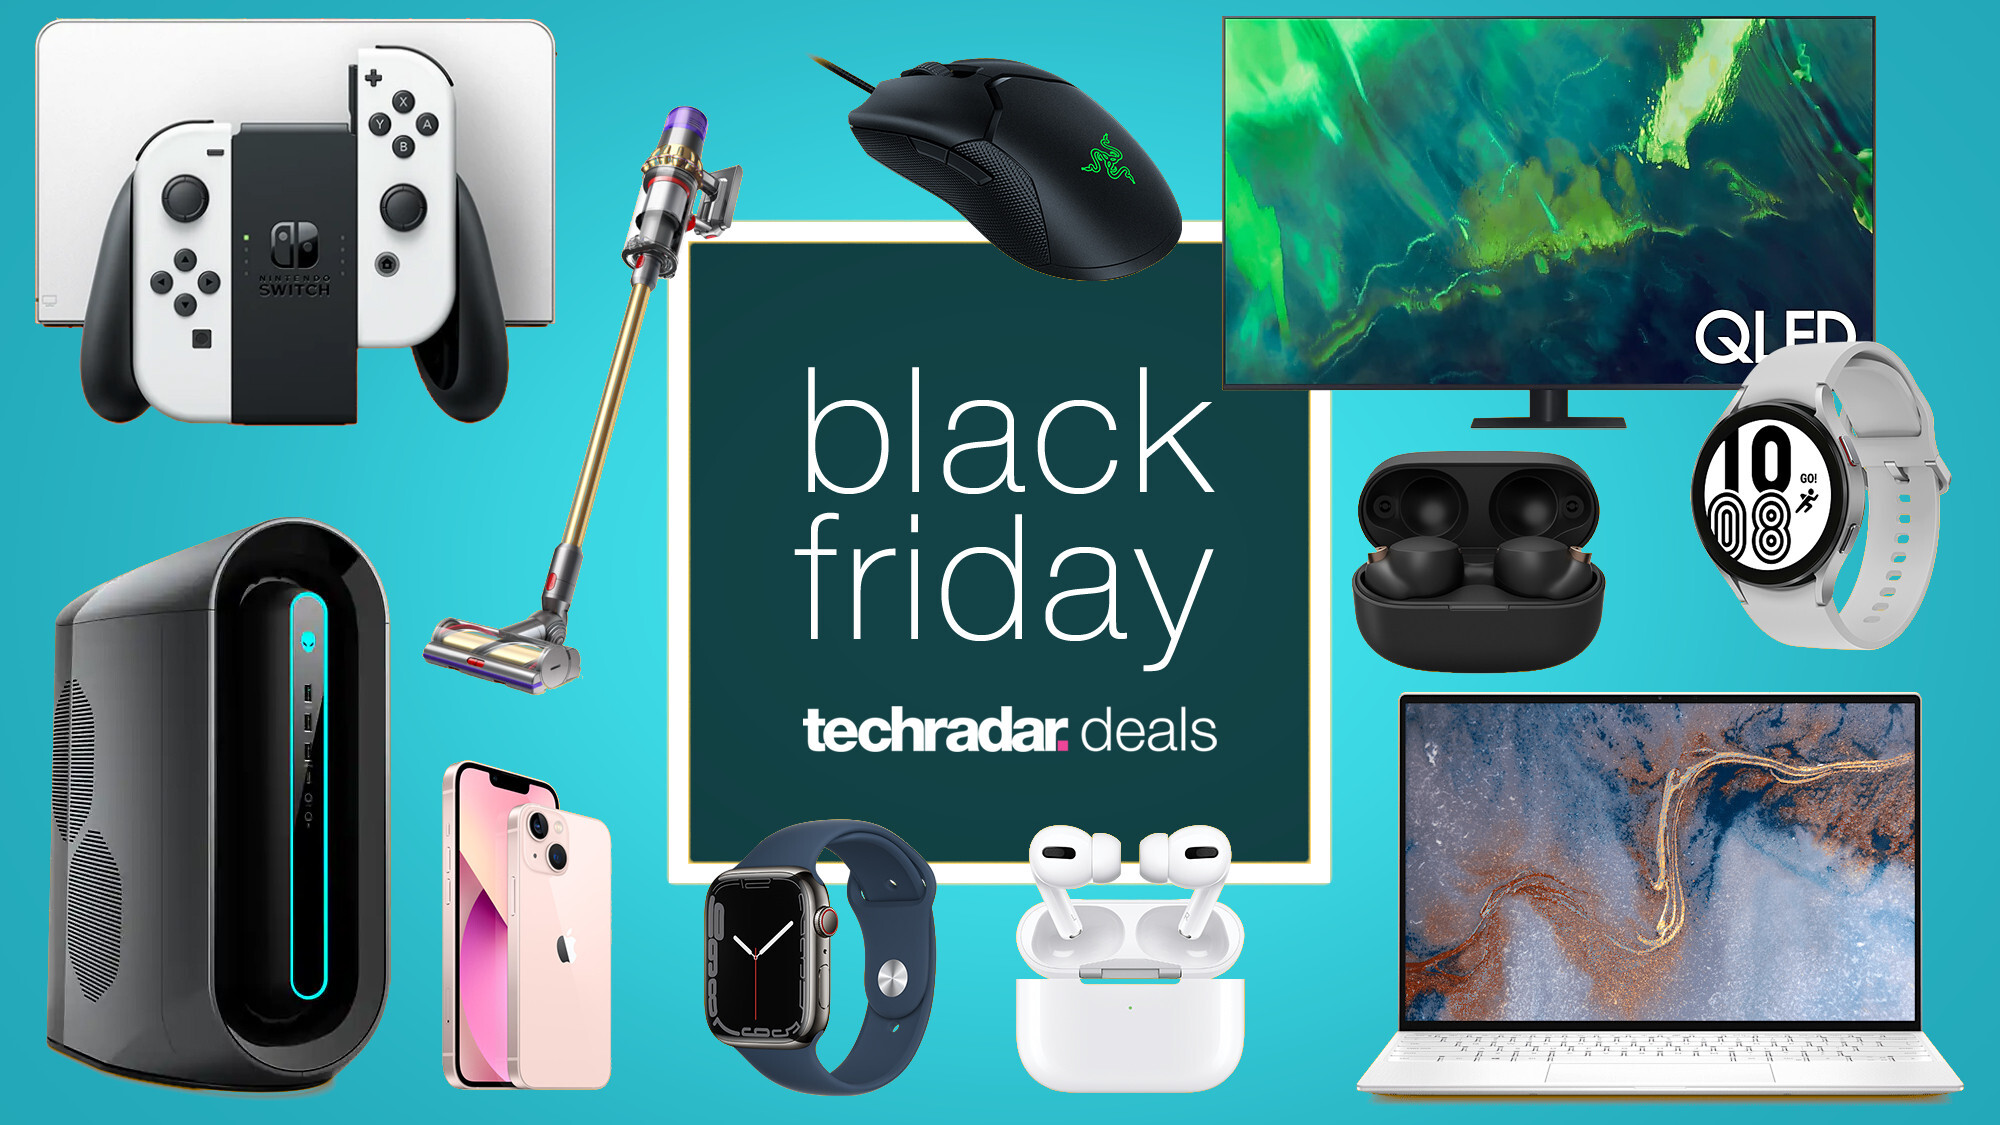 Various sought after gadgets like TVs, PCs and phones cover the page in front of the words: Black Friday